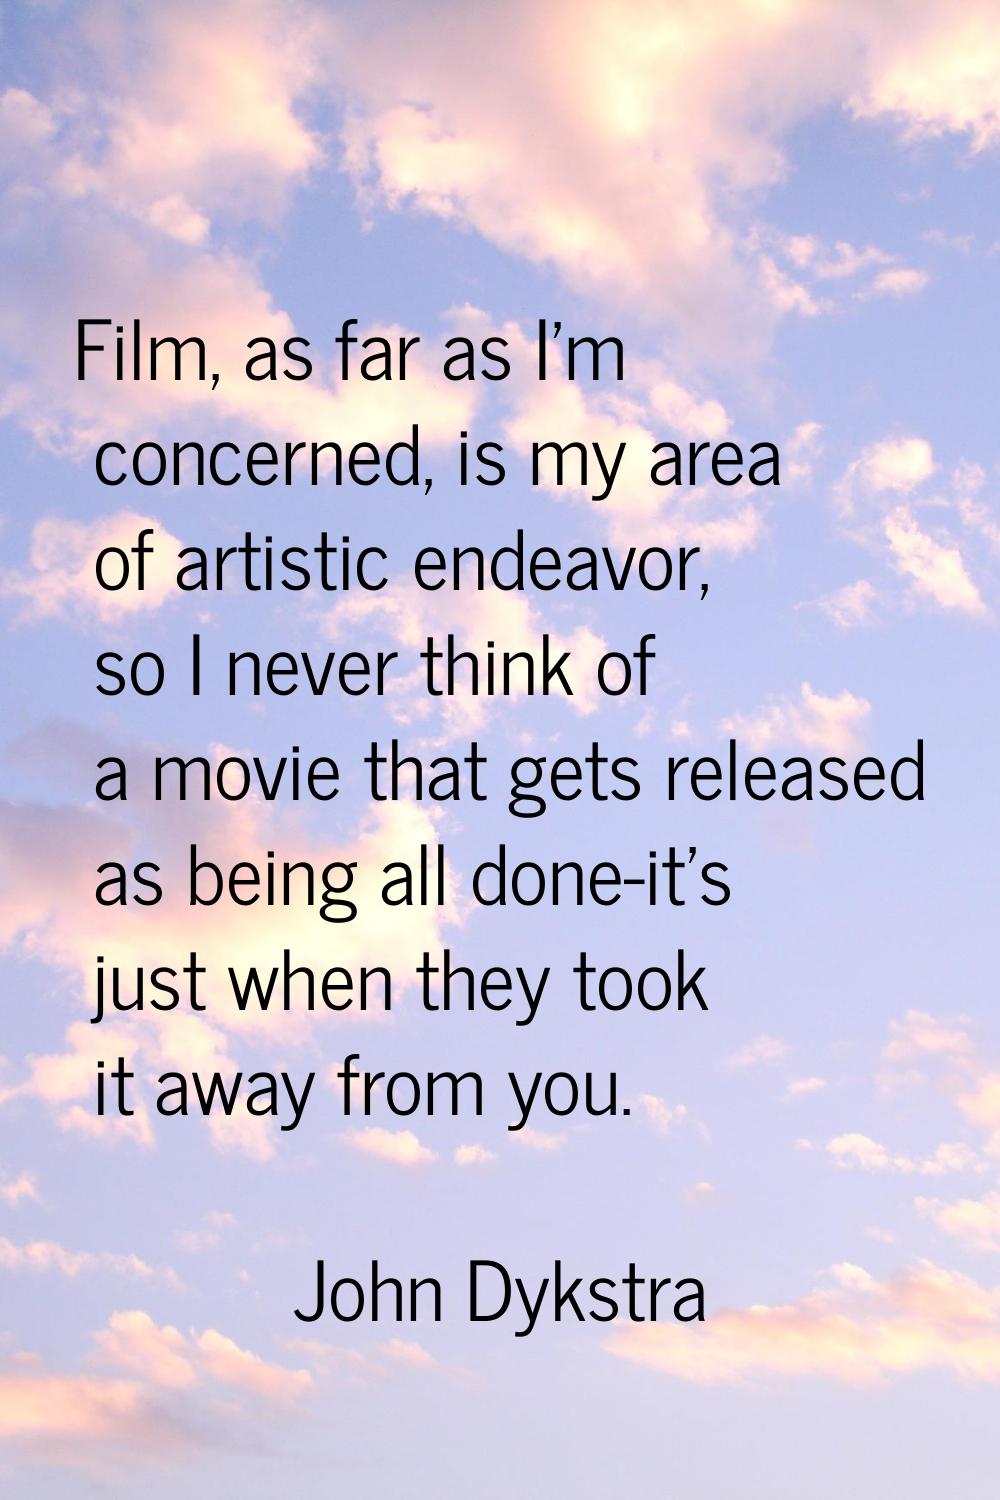 Film, as far as I'm concerned, is my area of artistic endeavor, so I never think of a movie that ge